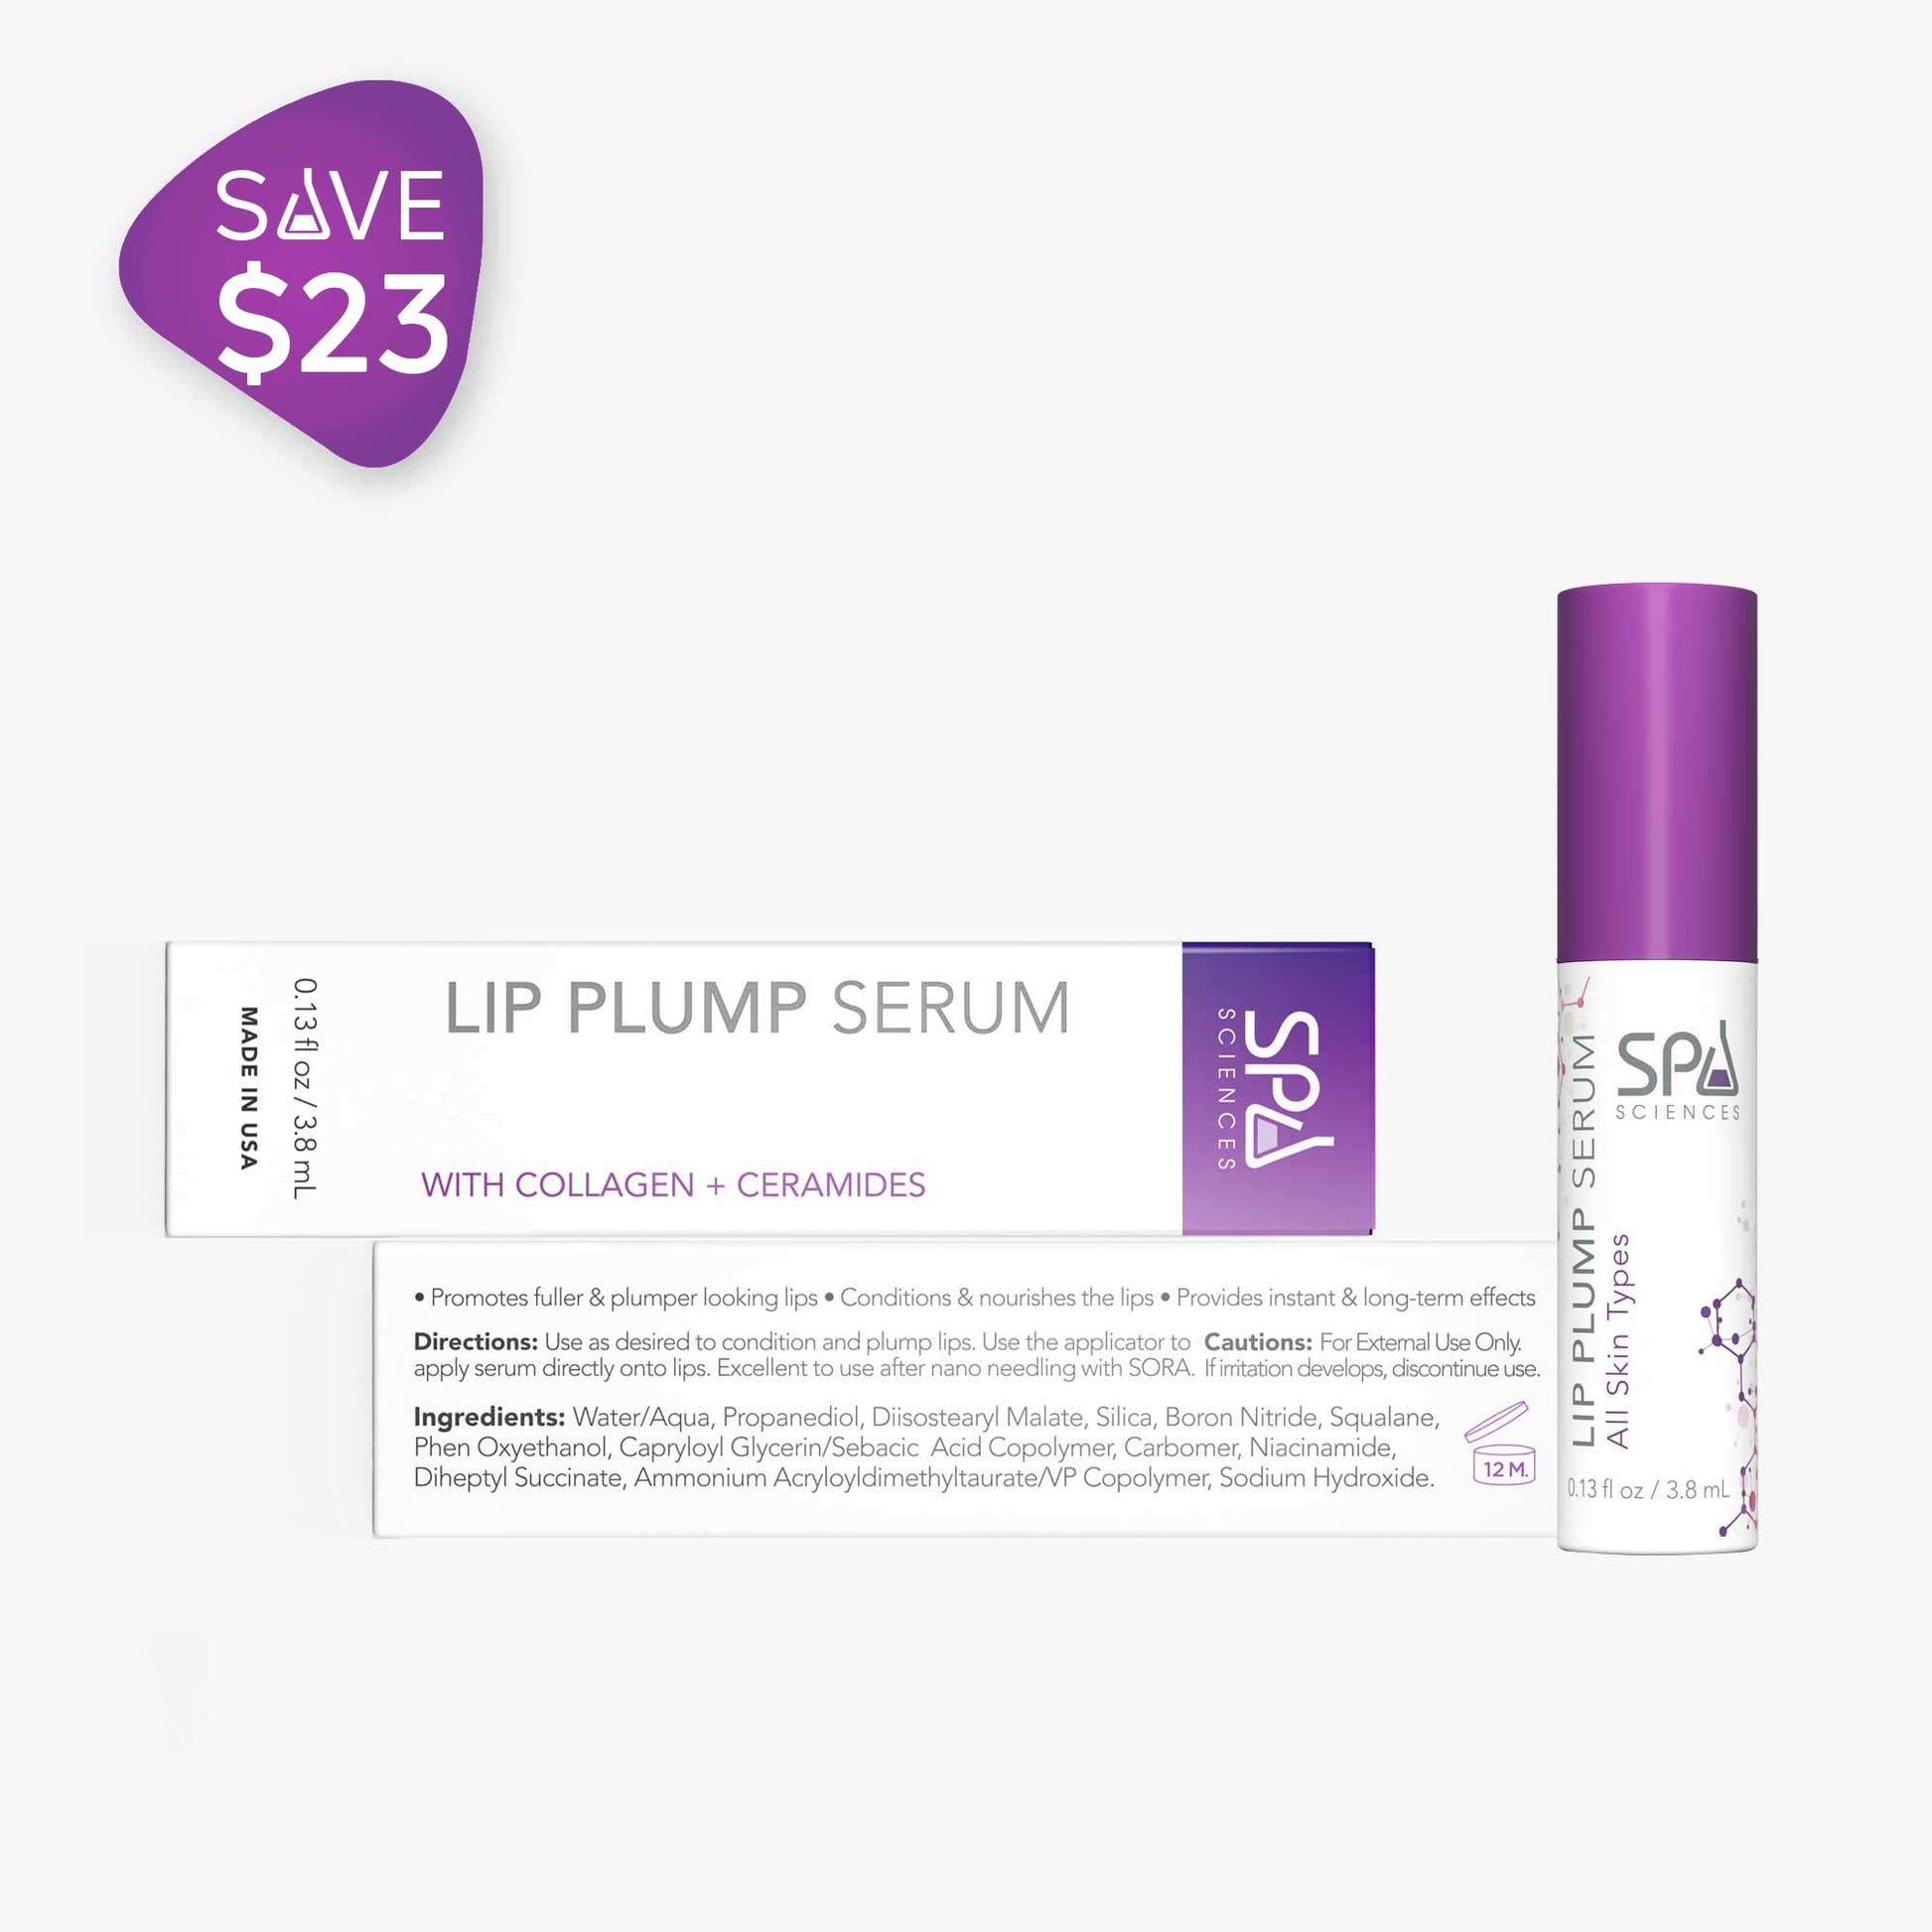 Organic Eyes & Lips plump serum with a purple bottle by Spa Sciences.